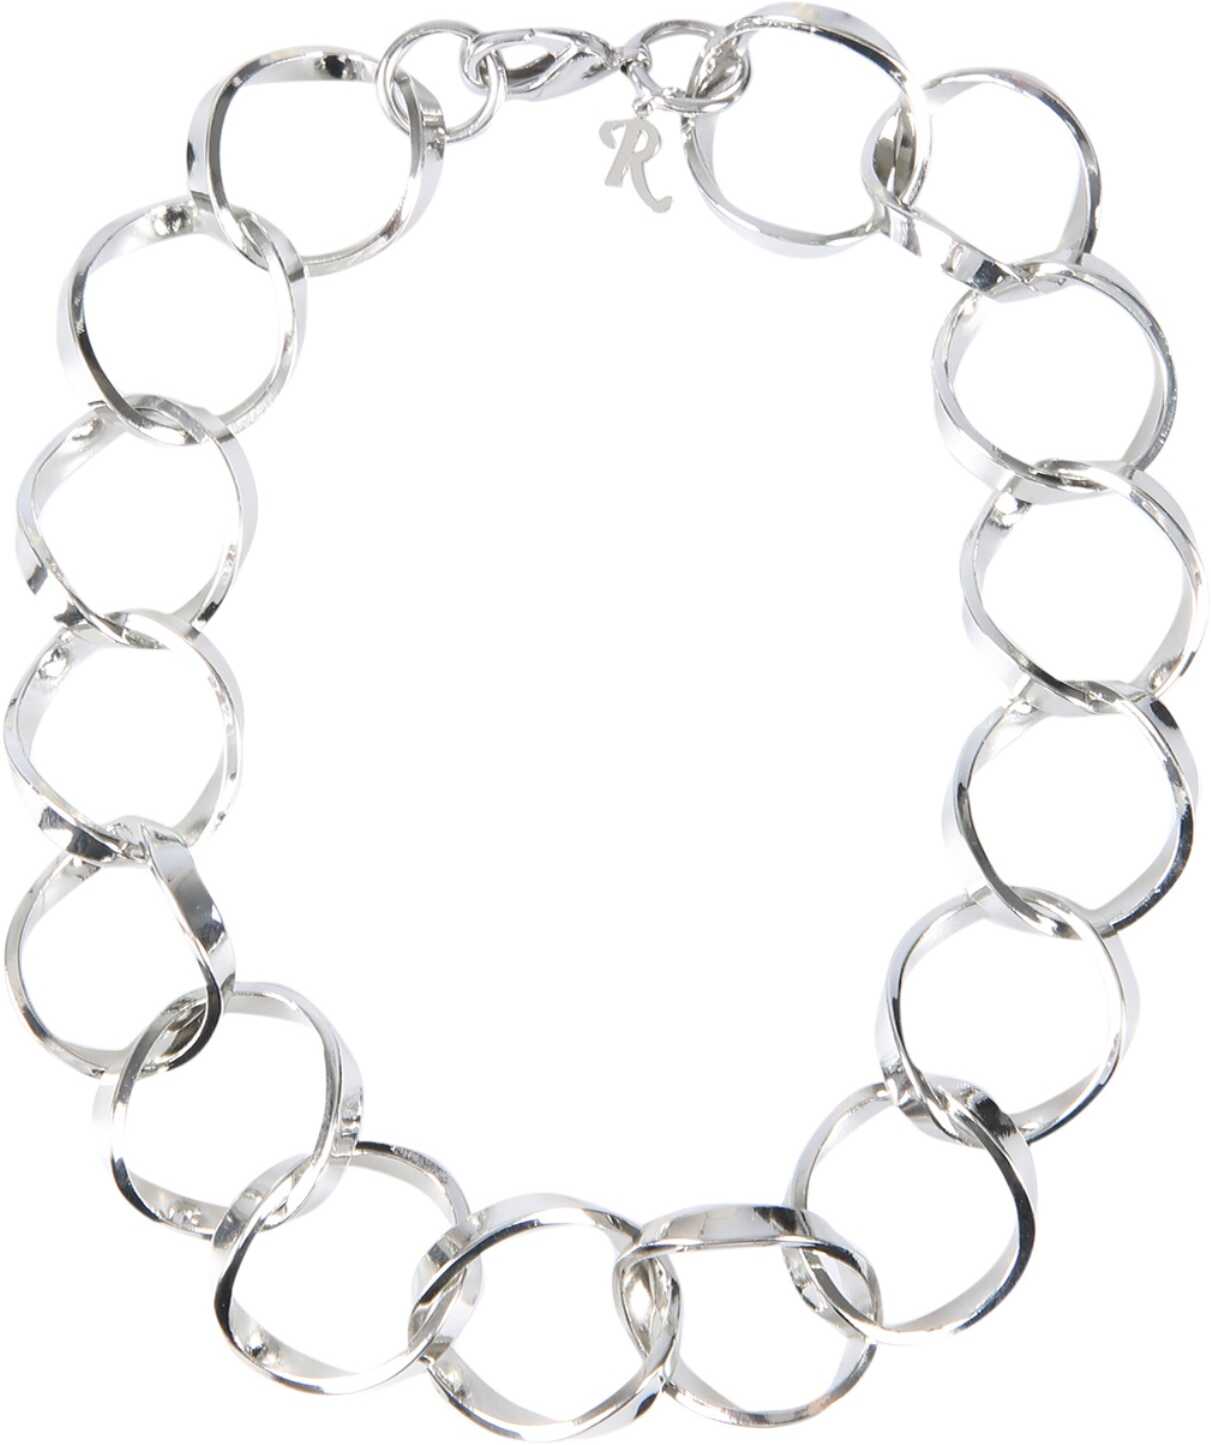 Raf Simons Linked Rings Necklace SILVER image14